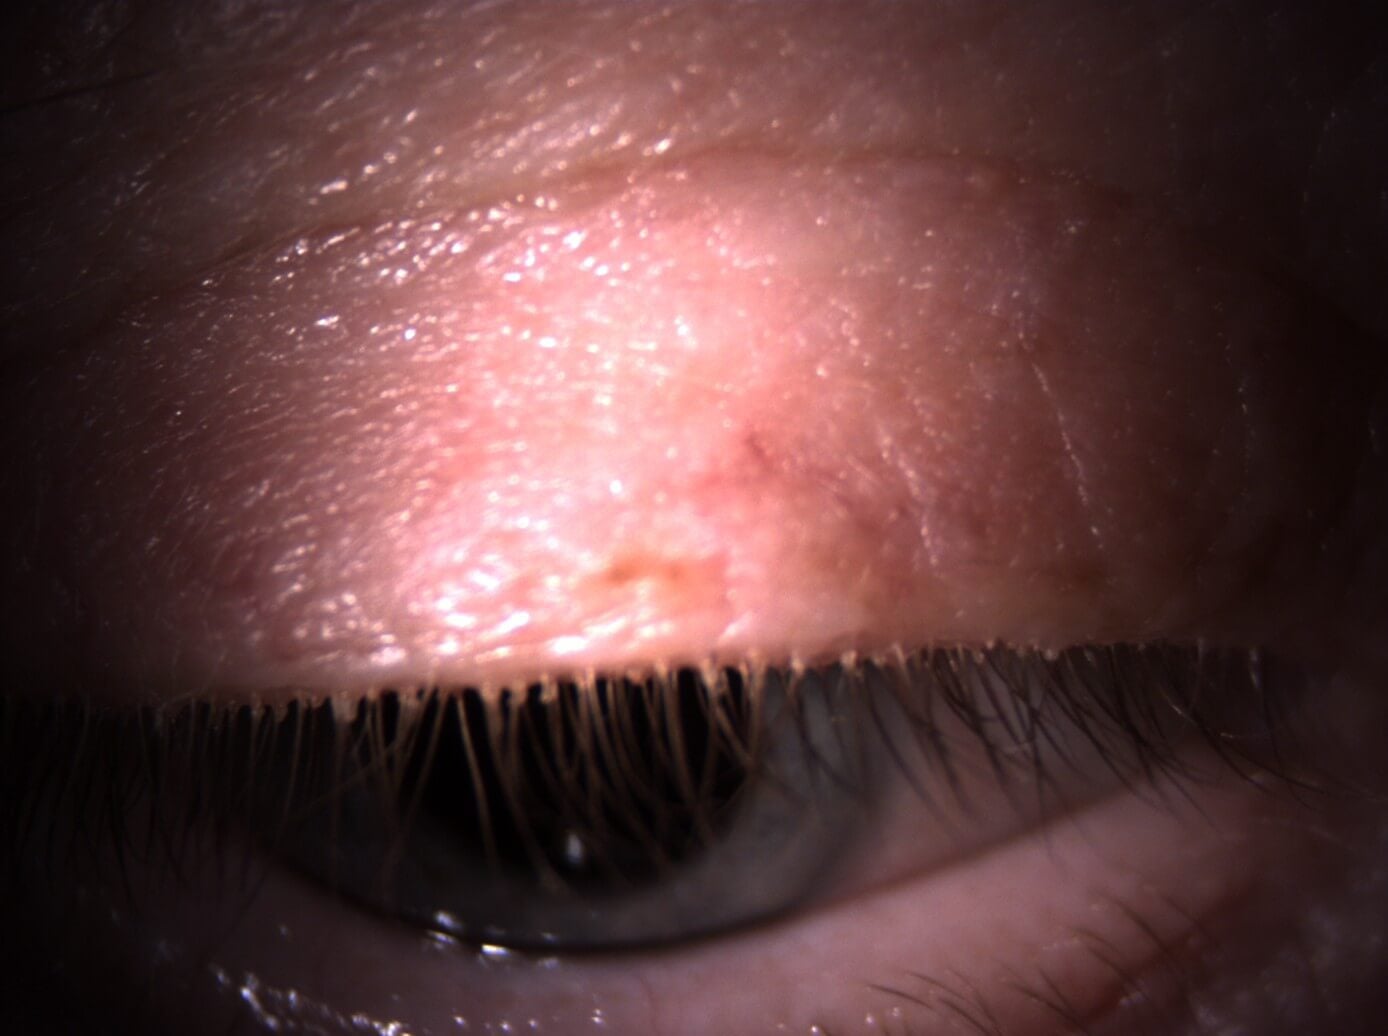 Same patient looking down; collarettes are visible